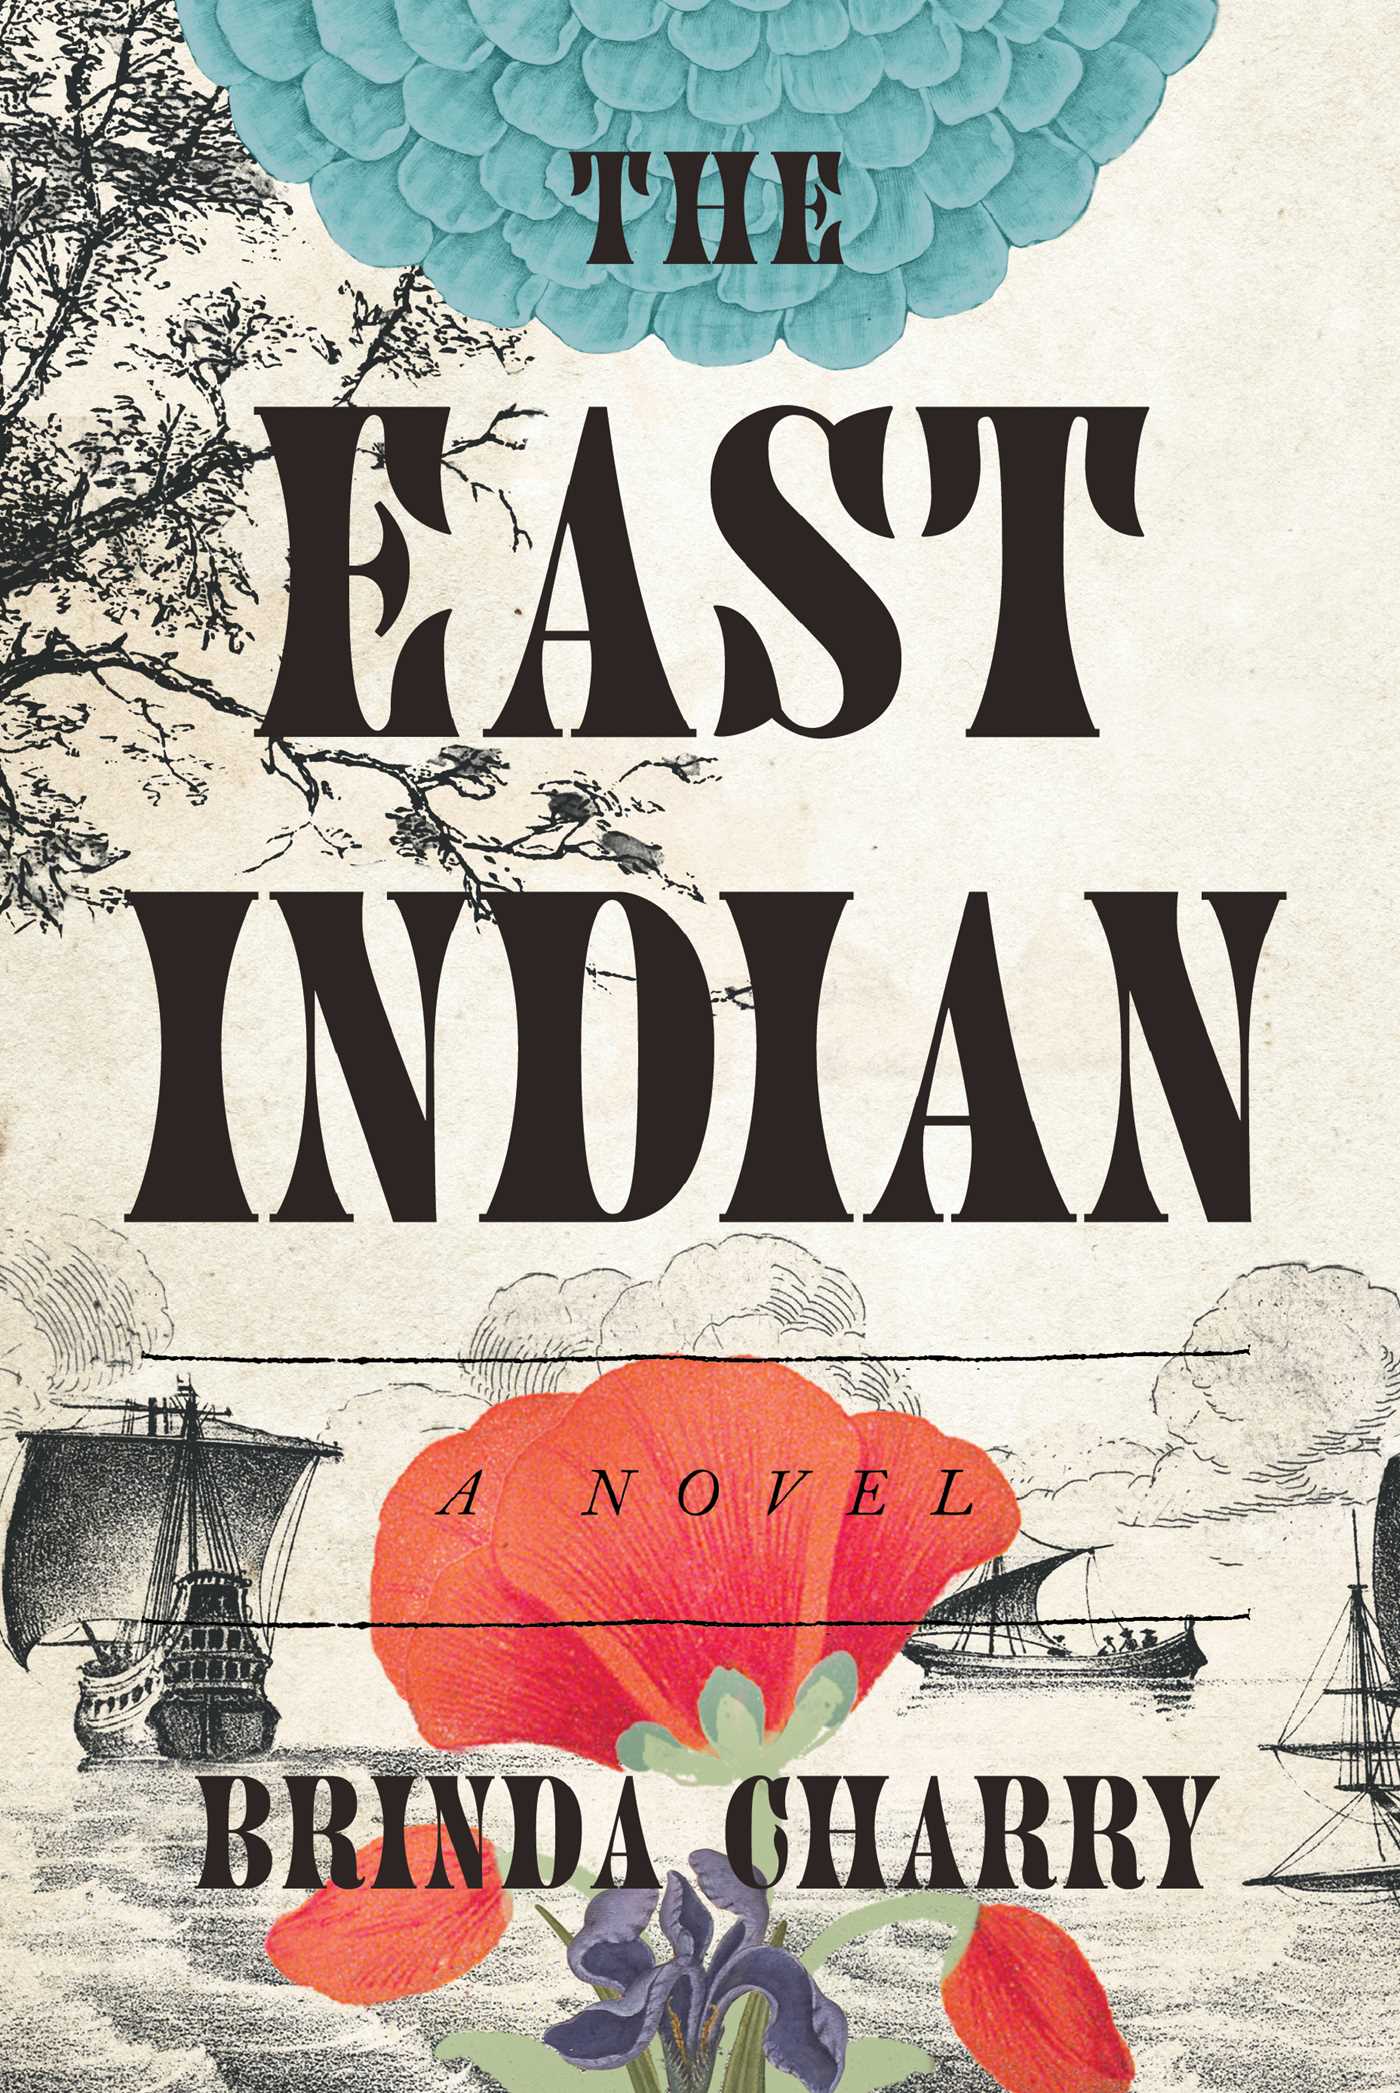 The East Indian Book Cover